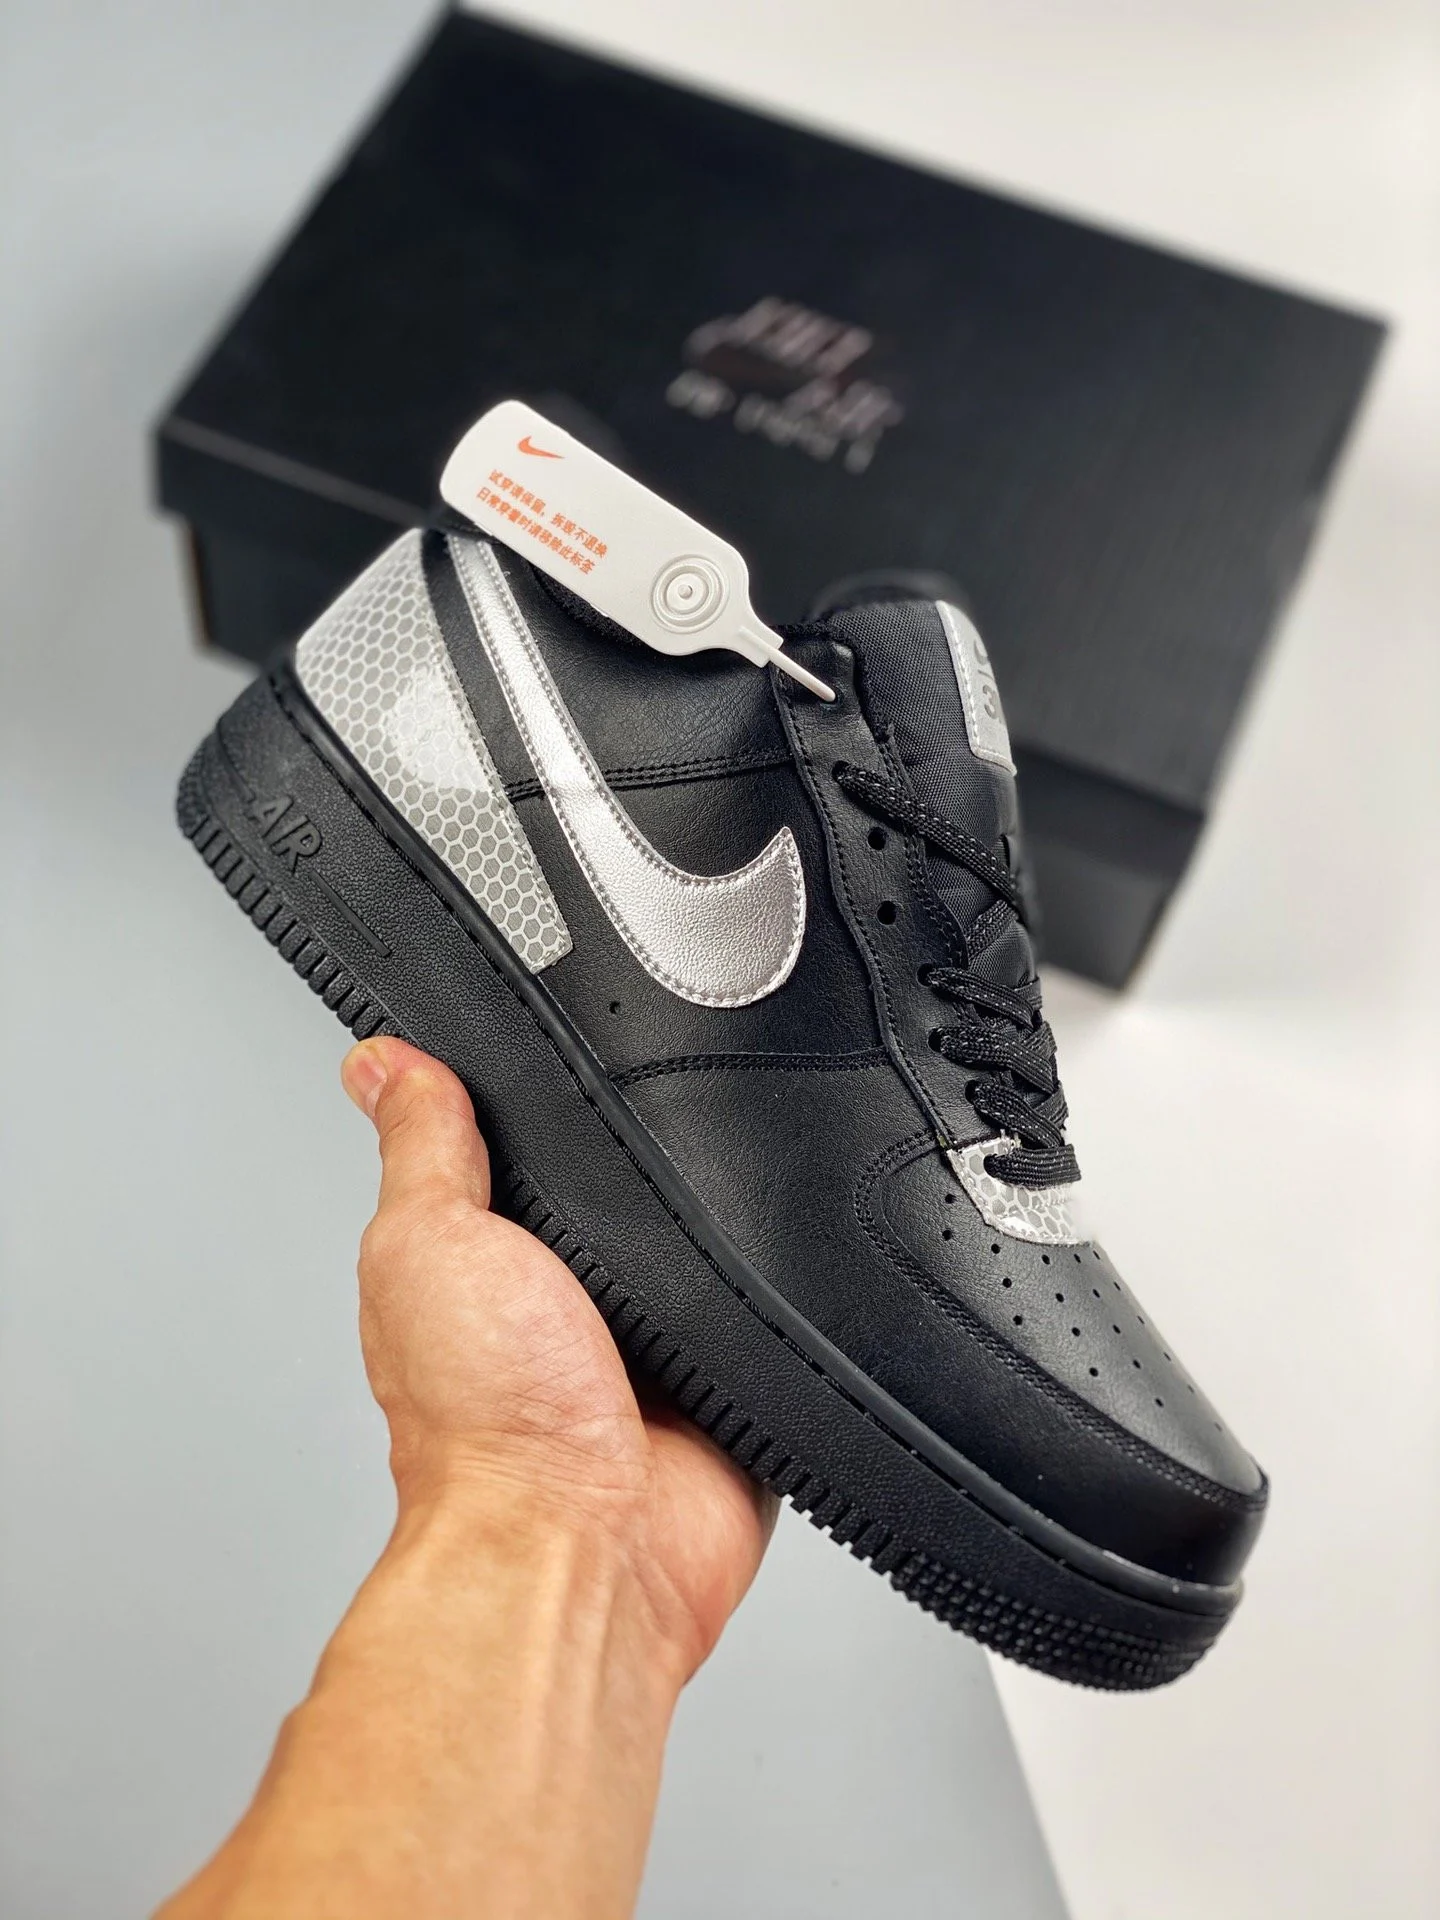 3M x Nike Air Force 1 Black Silver CT2299-001 For Sale